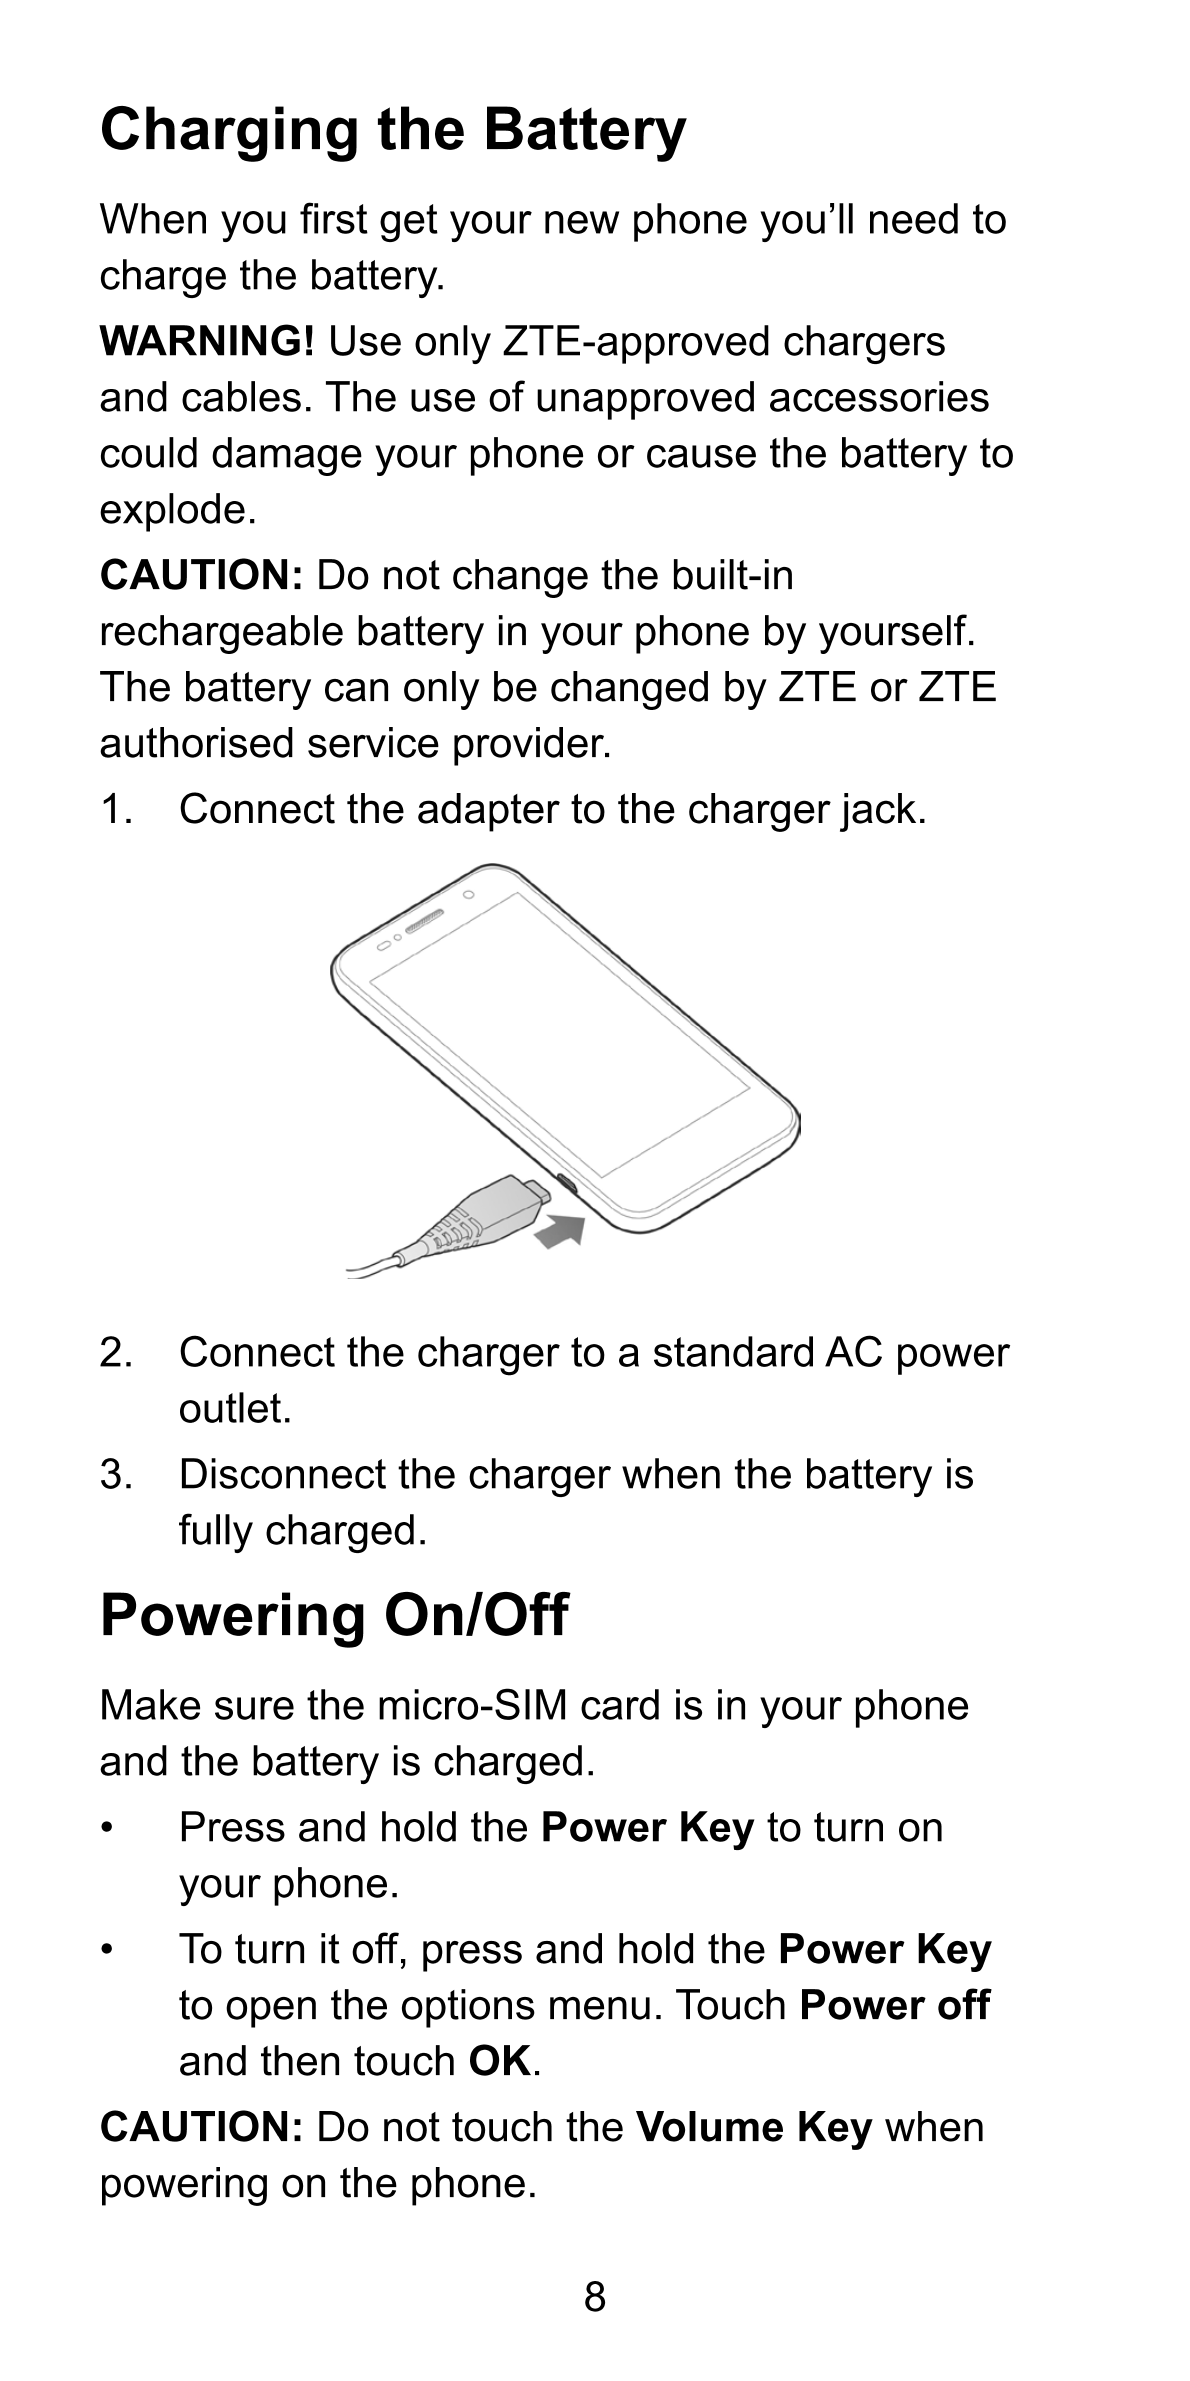 Charging the Battery
When you first get your new phone you’ll need to 
charge the battery.
WARNING! Use only ZTE-approved charge